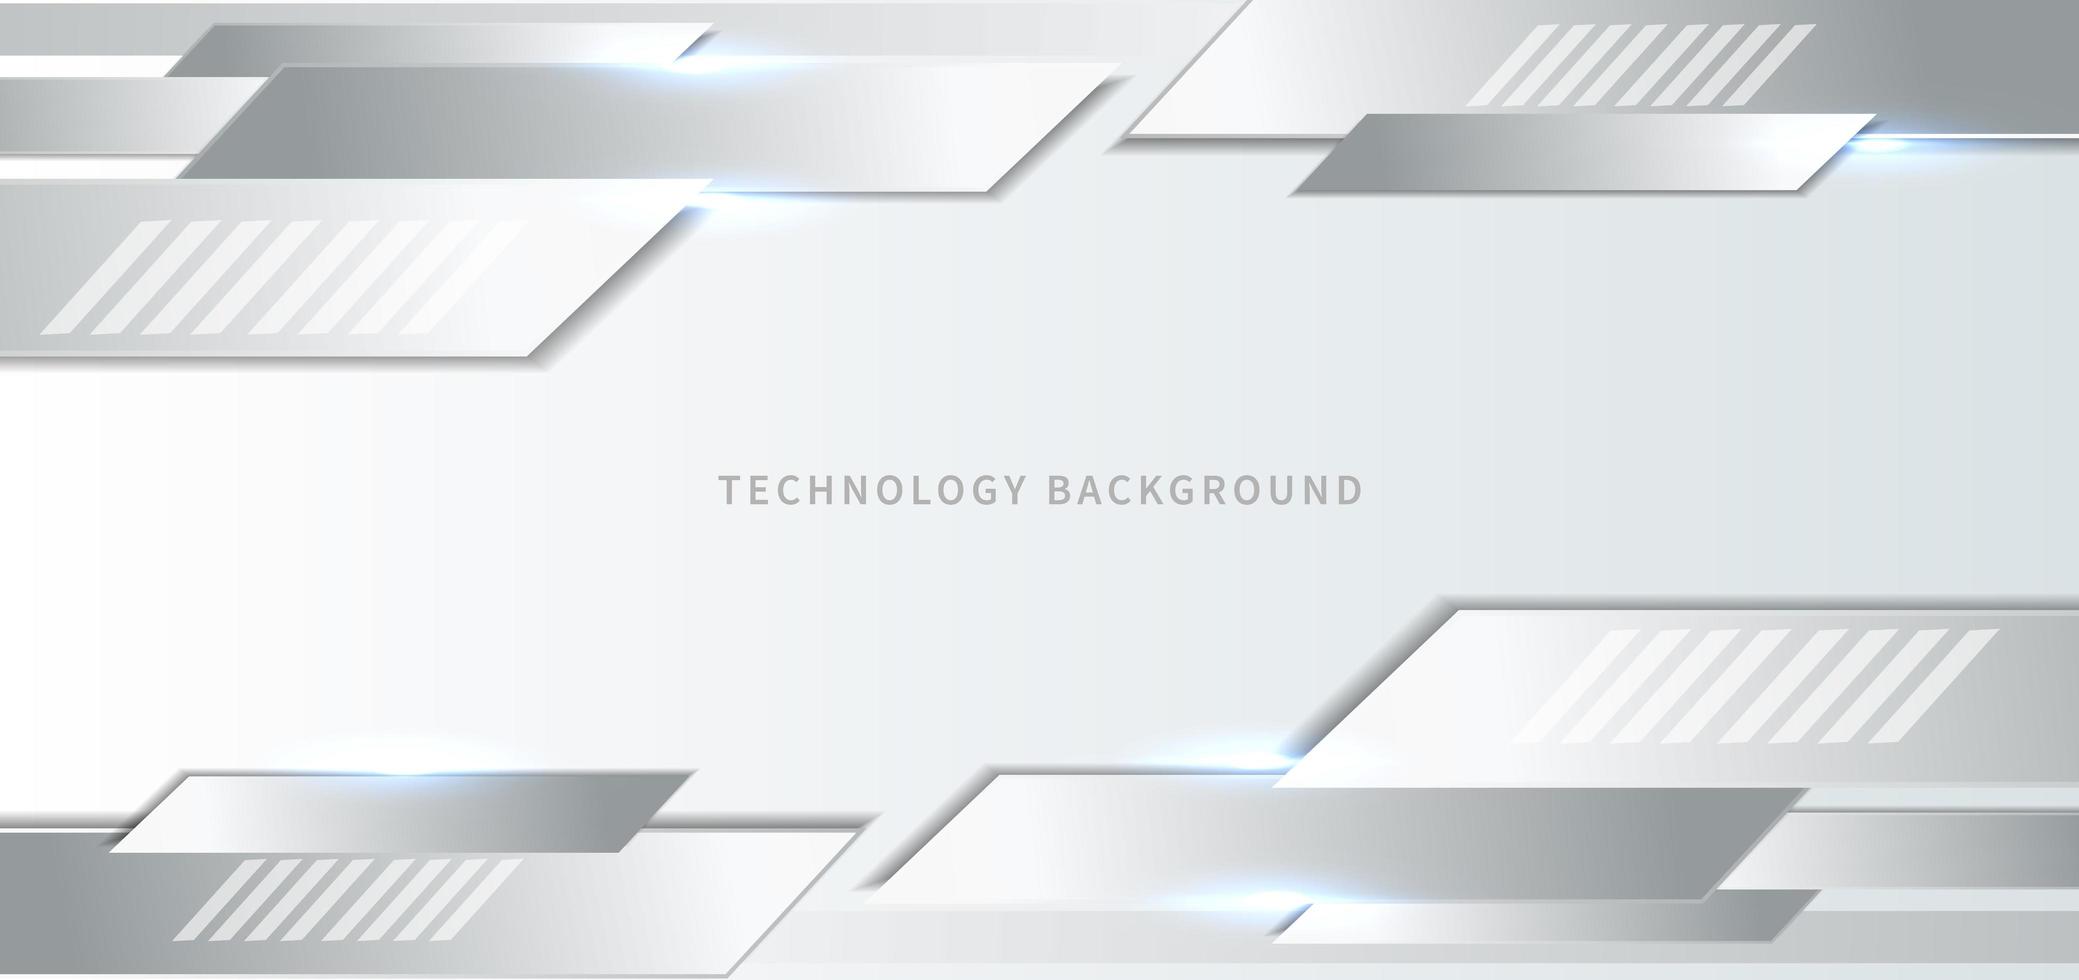 Technology background with white and grey elements vector